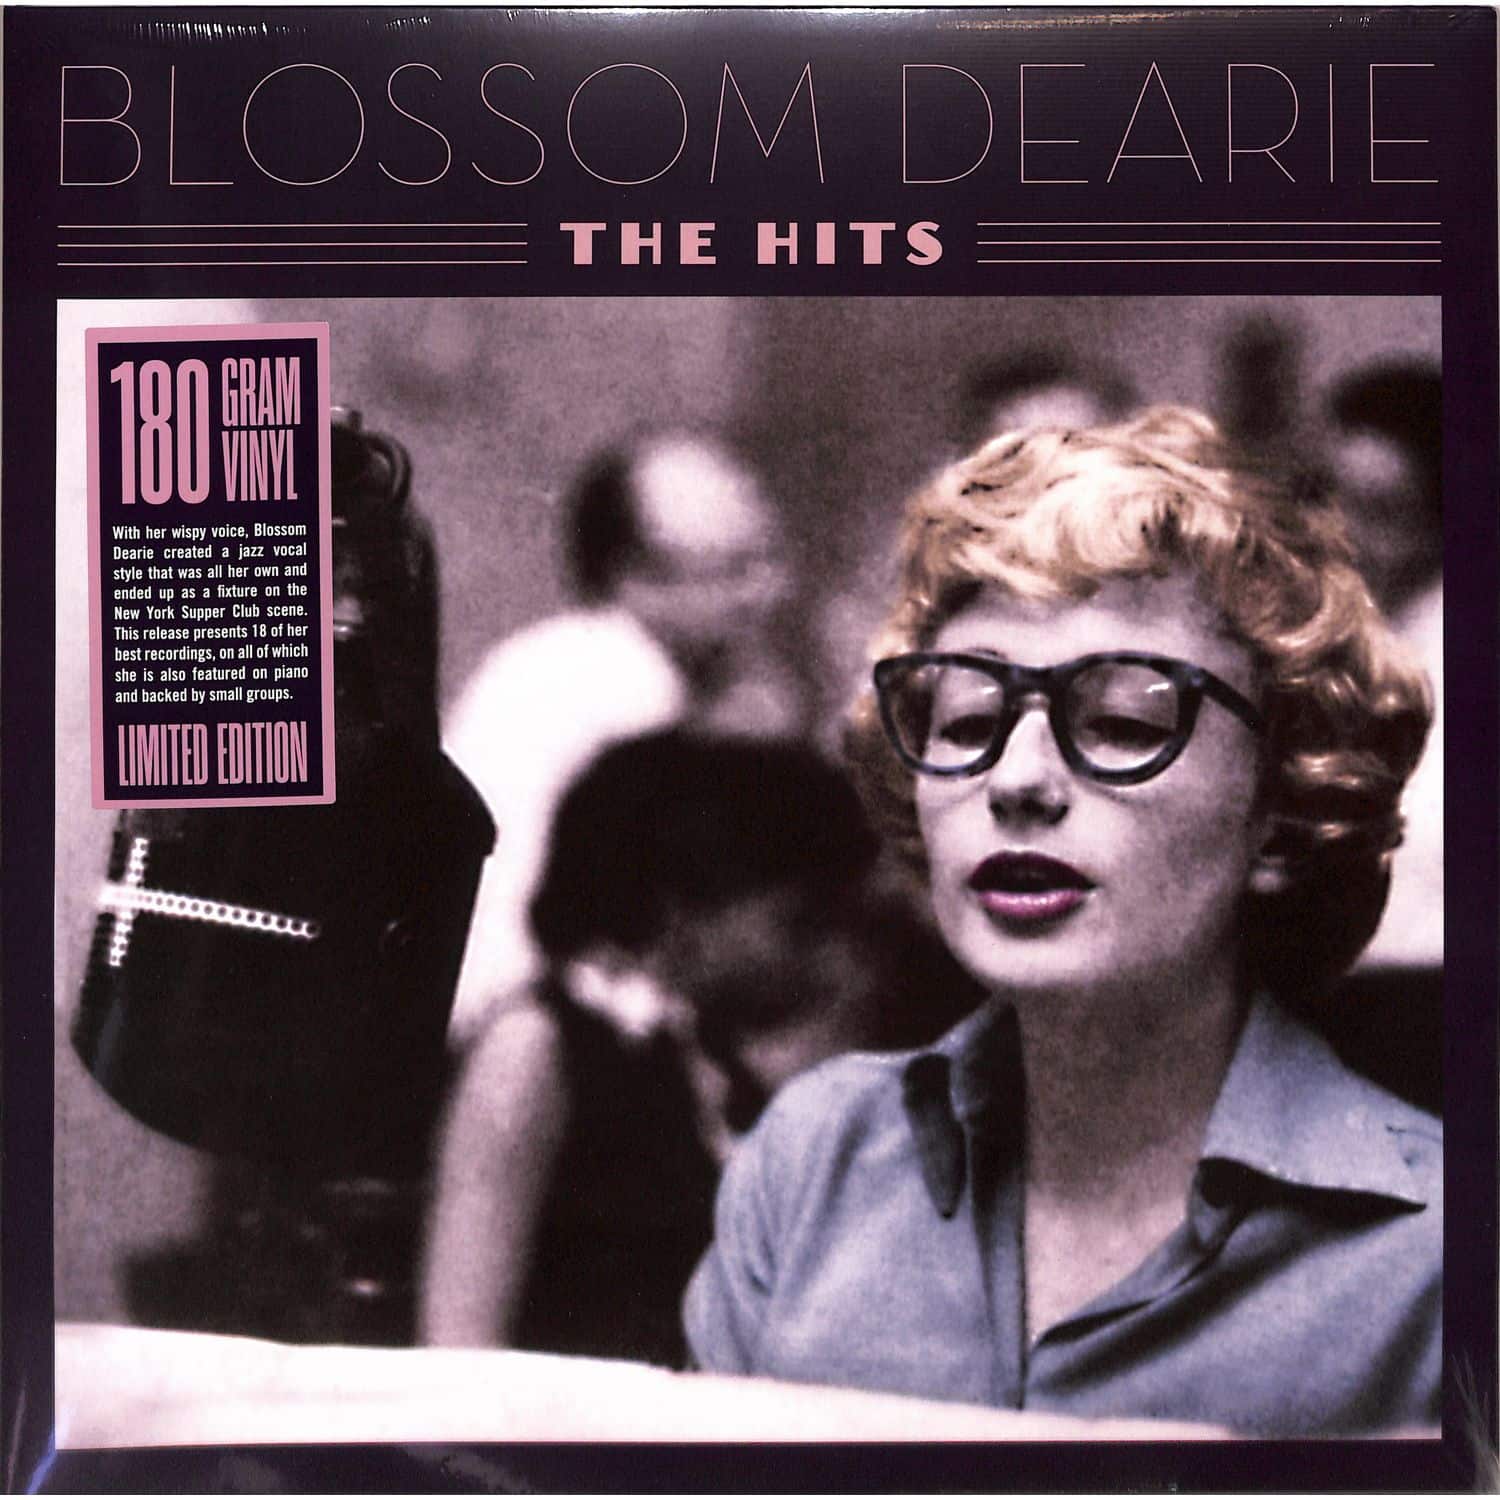 Blossom Dearie - THE HITS 